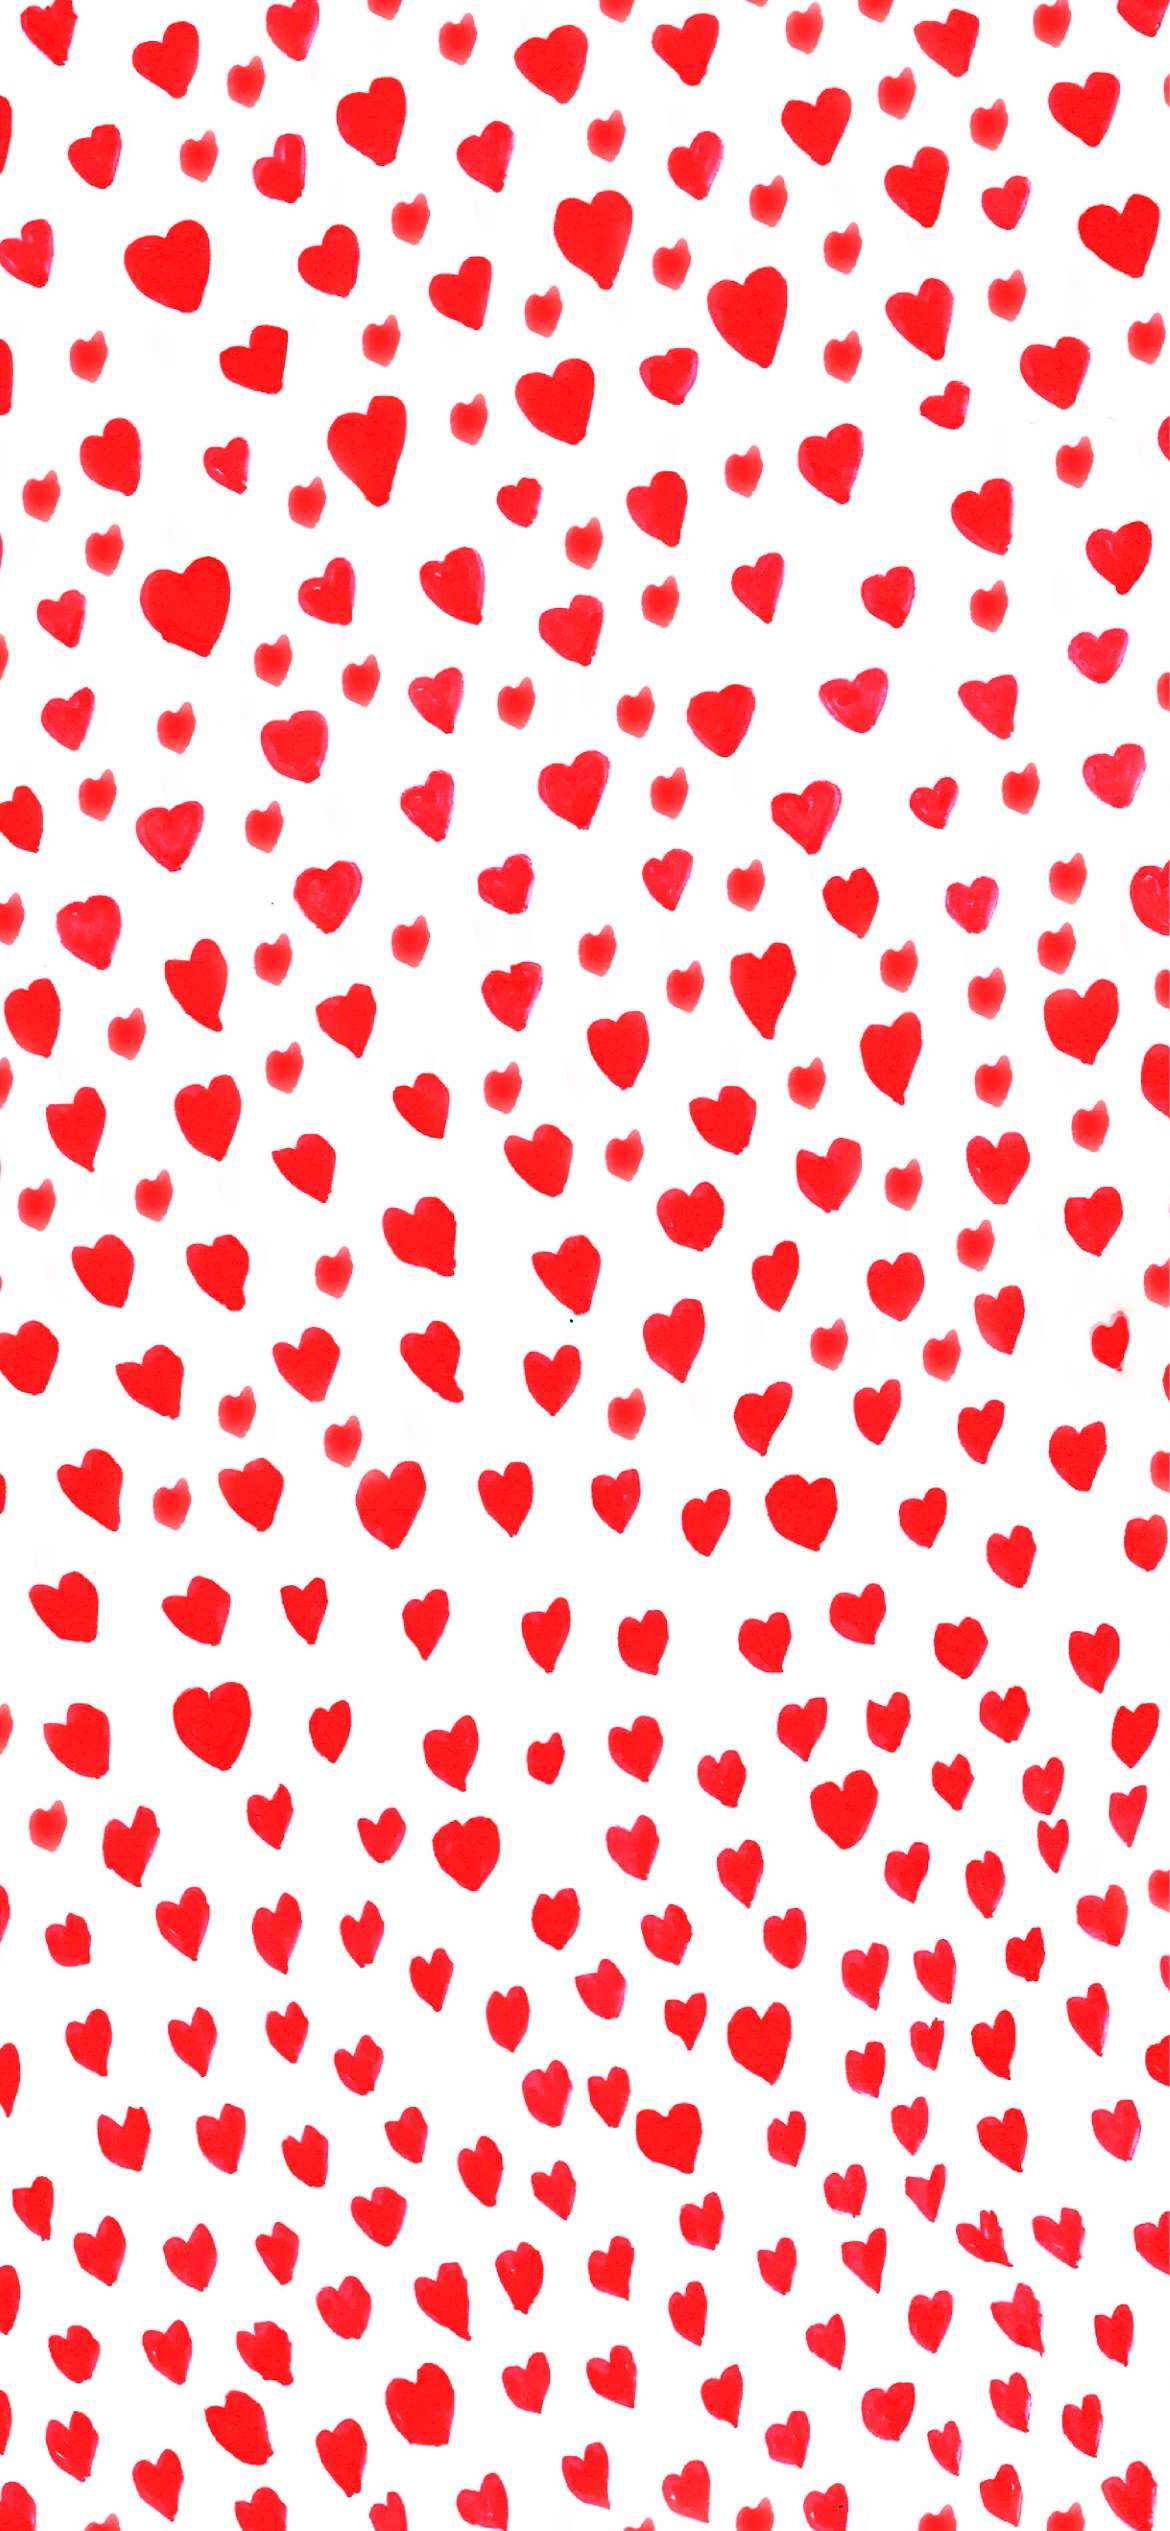 Red hearts on a white background - Valentine's Day